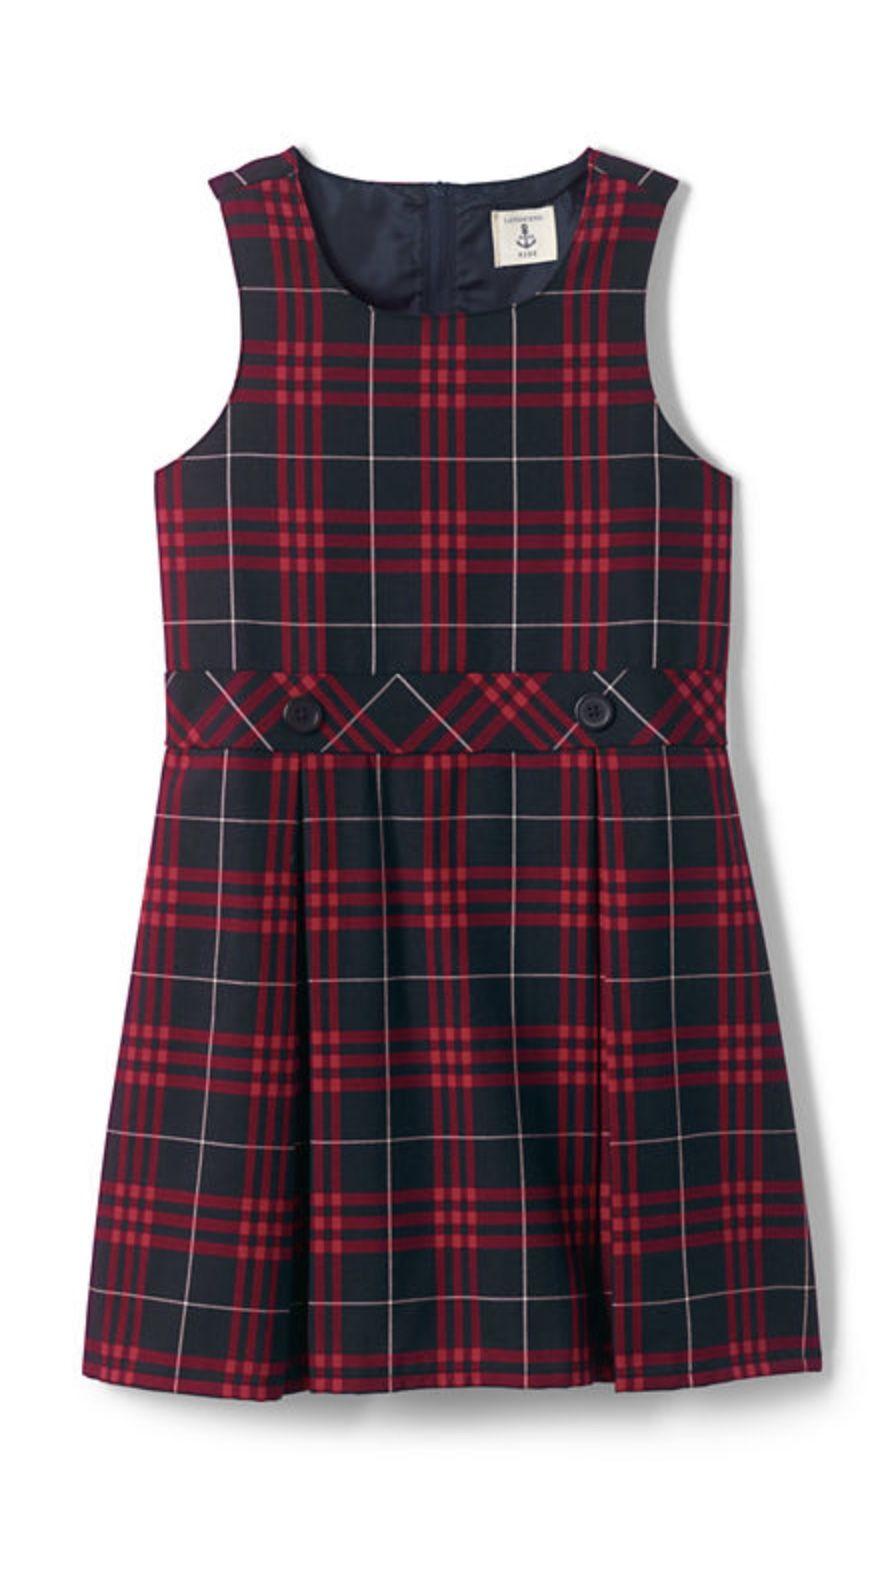 CHAPEL DAYS (THURSDAY) K - 4 Plaid Pleated Side Buckle Jumper in Classic Navy Large Plaid (Lands End) 3 above knee or longer Blue School Uniform Short/ Long Sleeve Oxford or Peter Pan Collar No